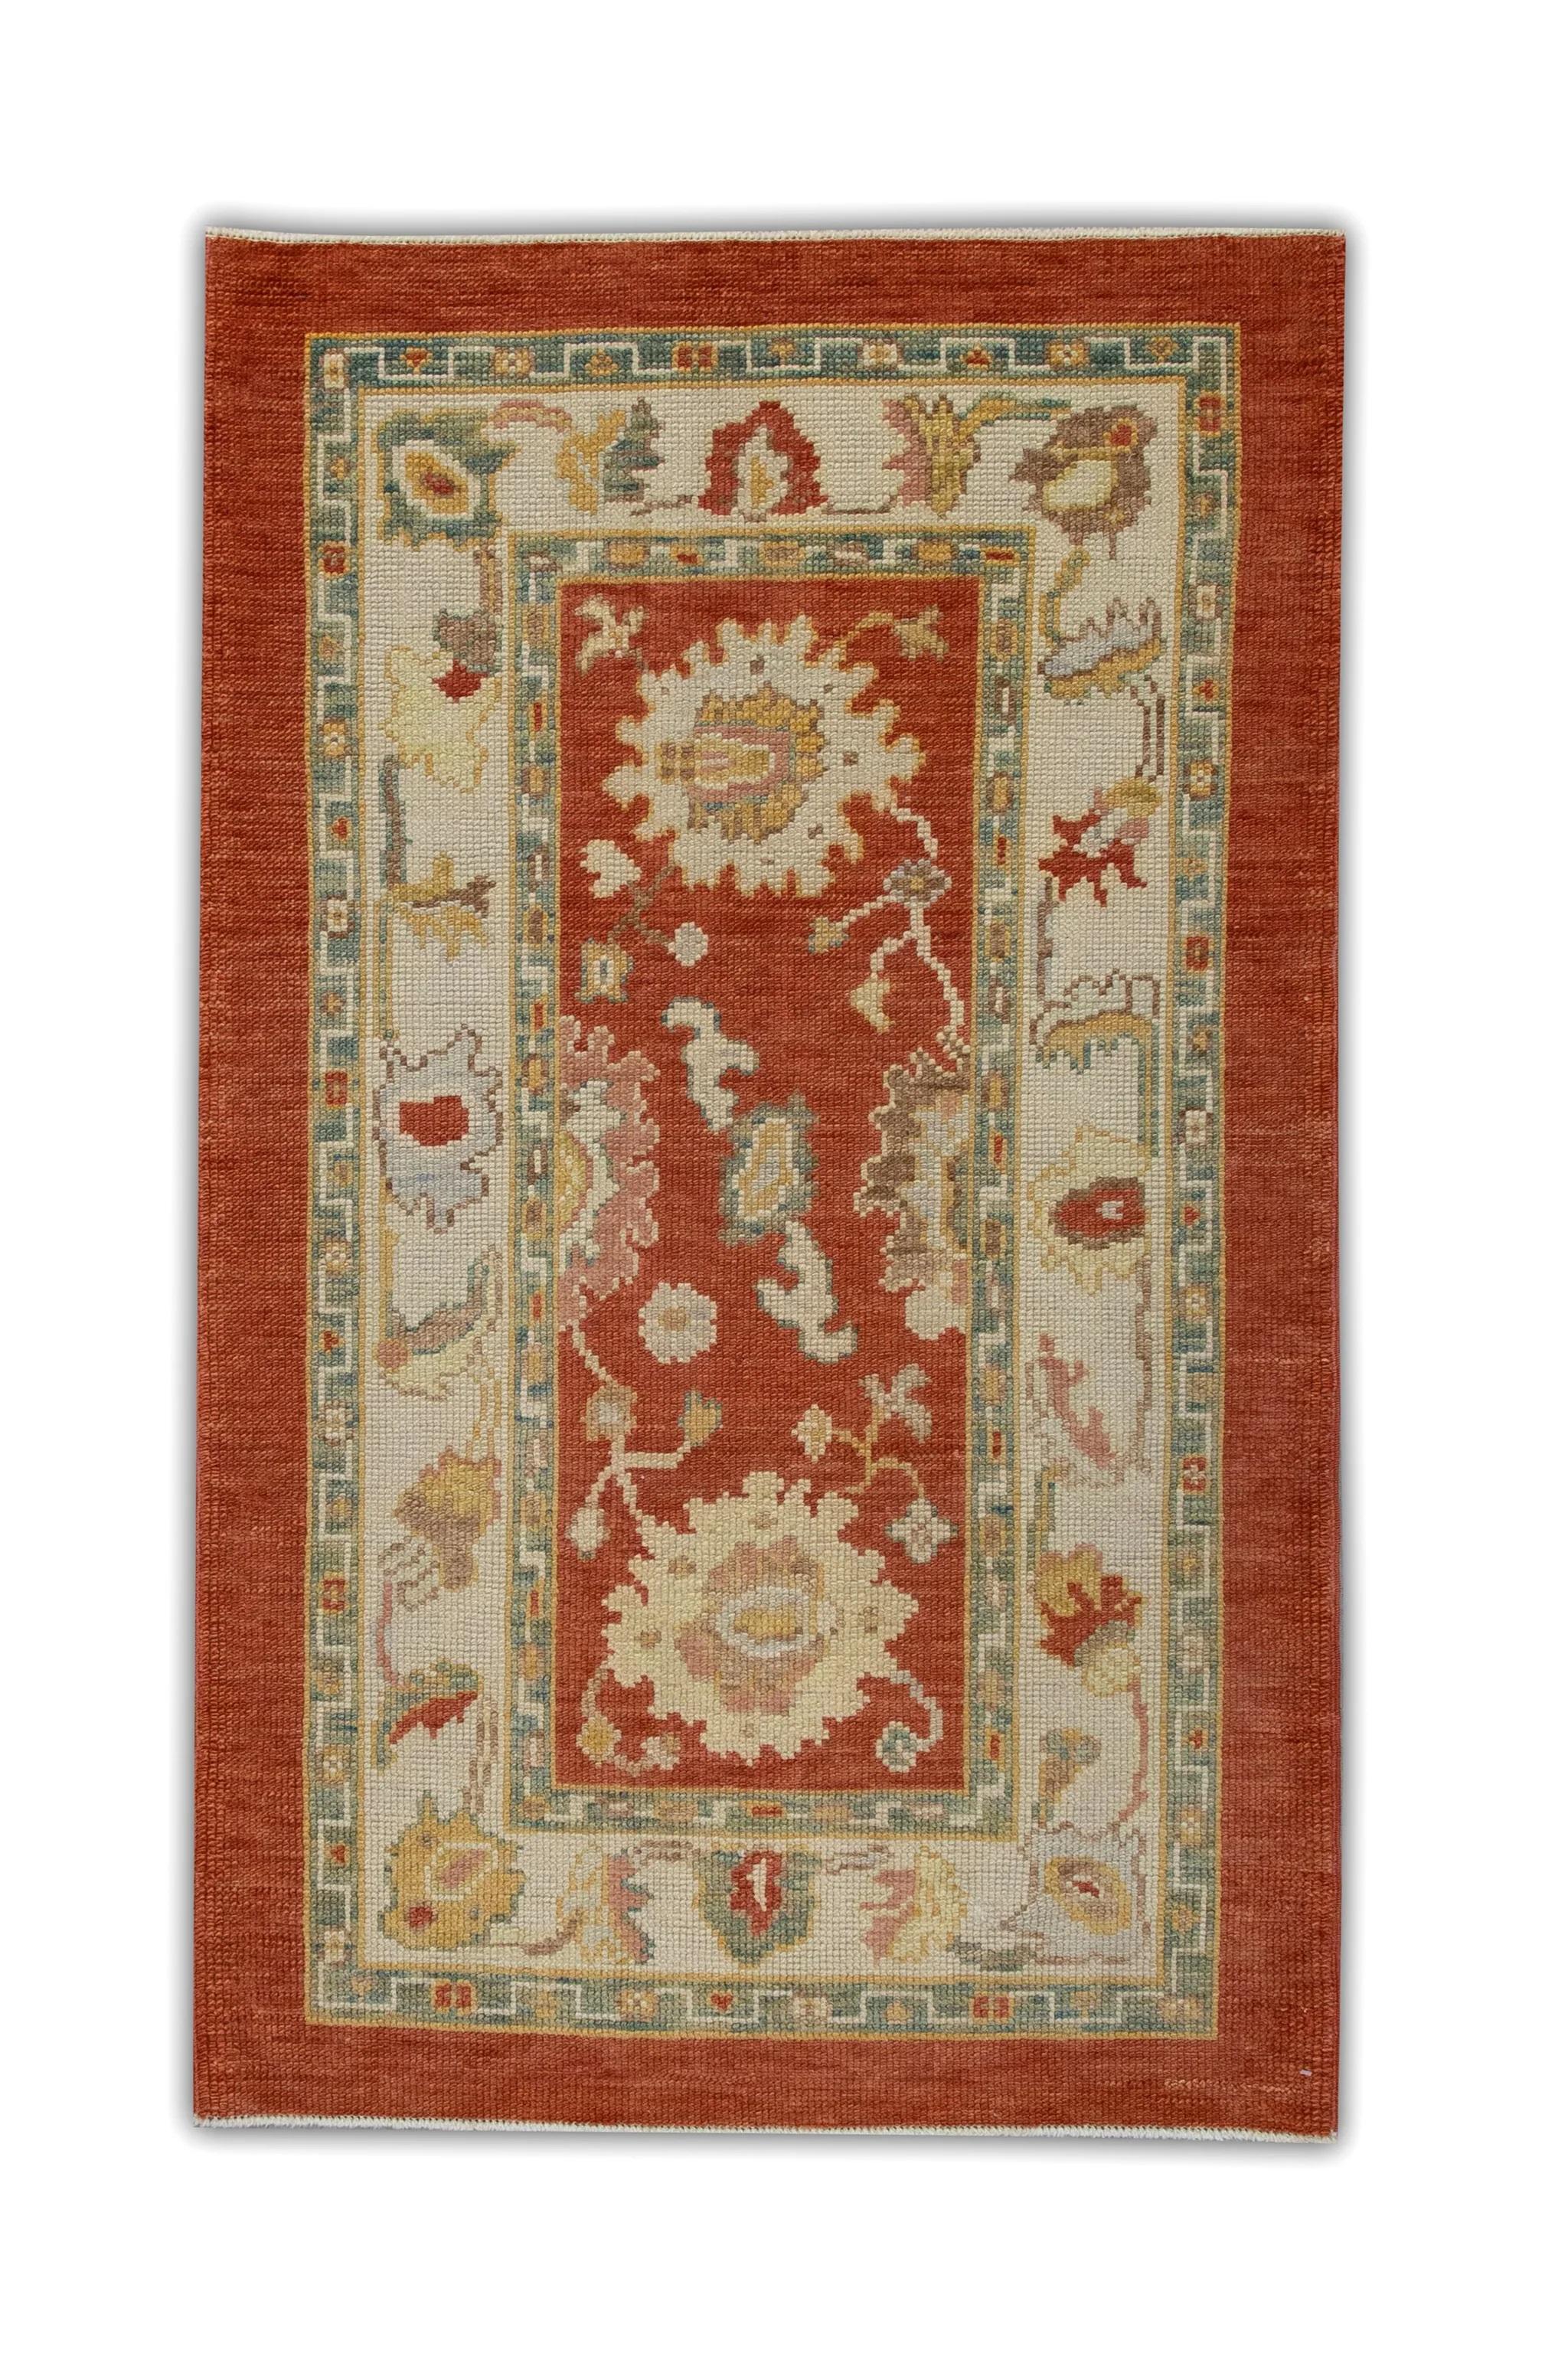 Floral Handwoven Wool Turkish Oushak Rug in Deep Red, Cream, and Green 3'1x4'10 For Sale 1